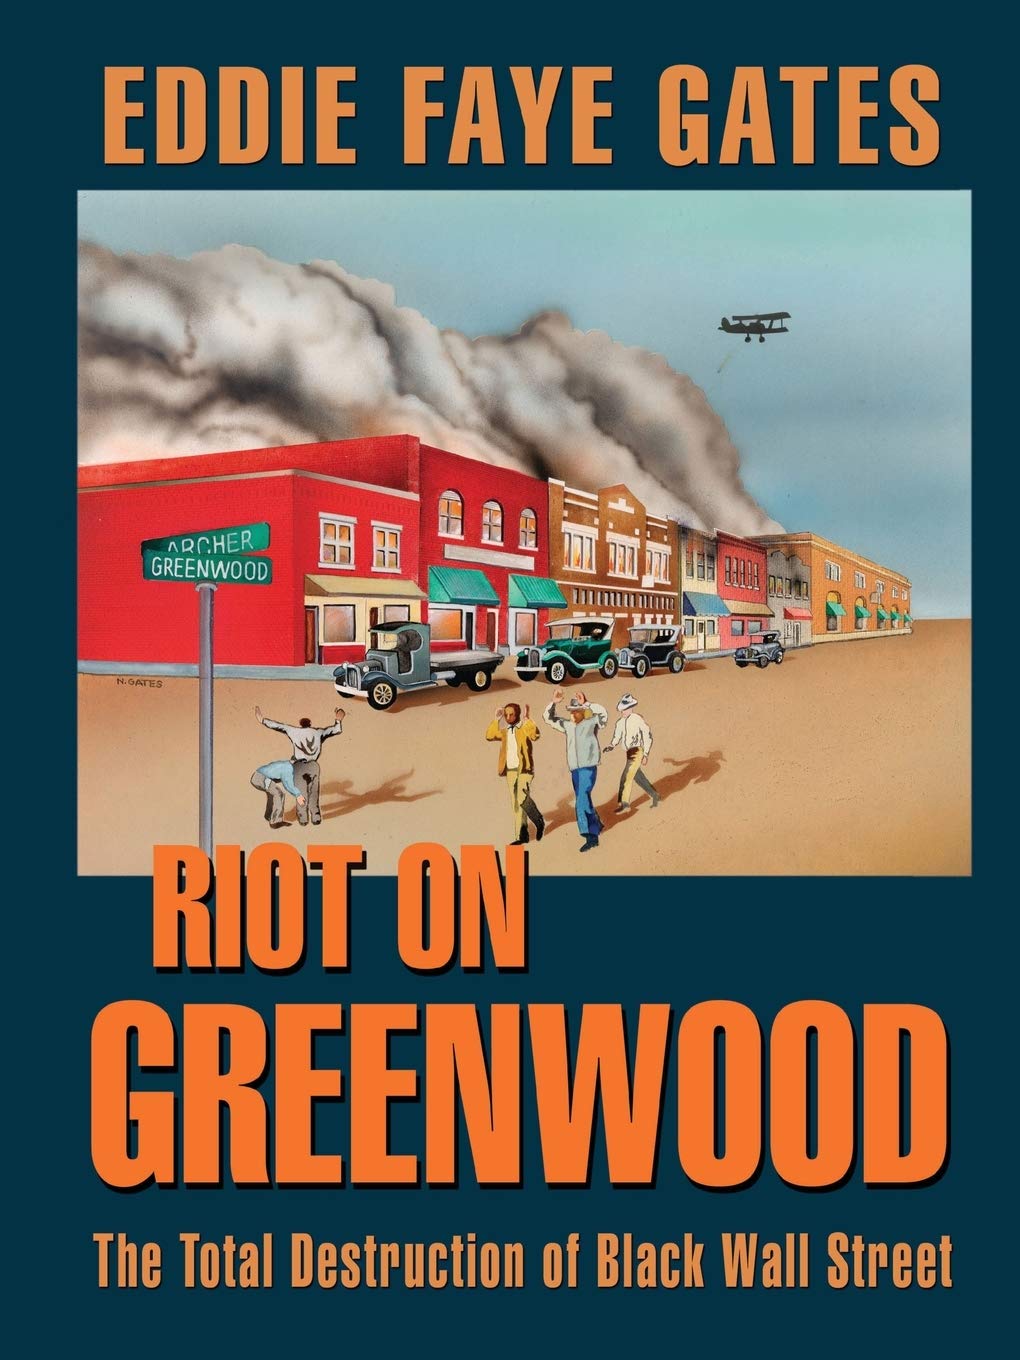 Tulsa educator, historian and activist Eddie Faye Gates, who was appointed to the Tulsa Race Riot Commission in 1998, delivers an in-depth account of the massacre with "Riot on Greenwood: The Total Destruction of Black Wall Street."